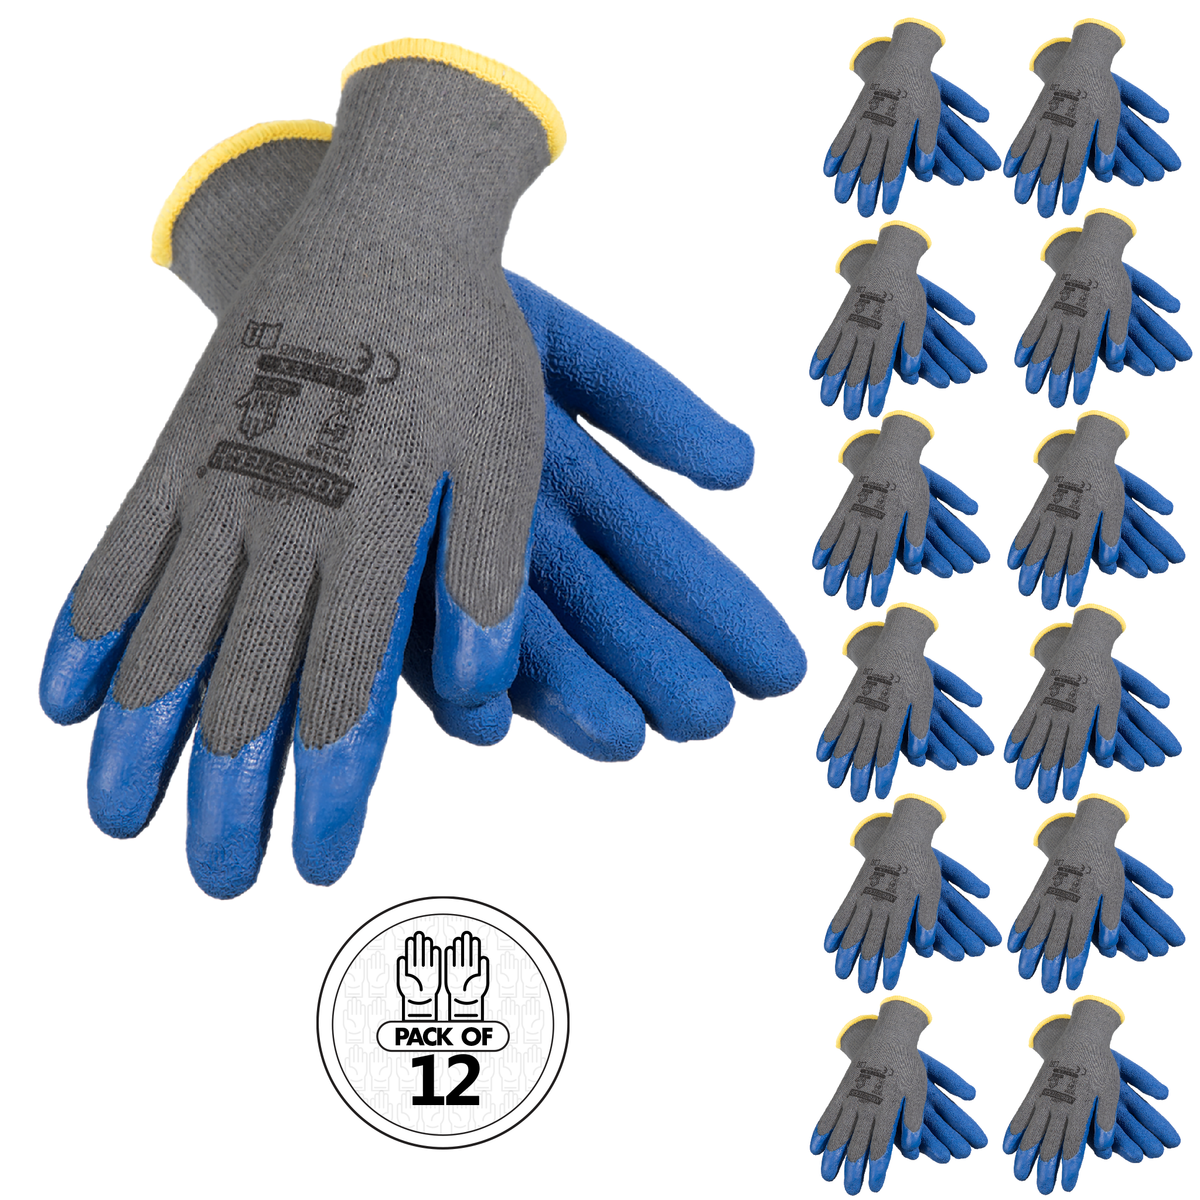 Cut-Resistant Multipurpose Work Gloves – Pack of 12 | Technopack Safety & PPE M by JORESTECH